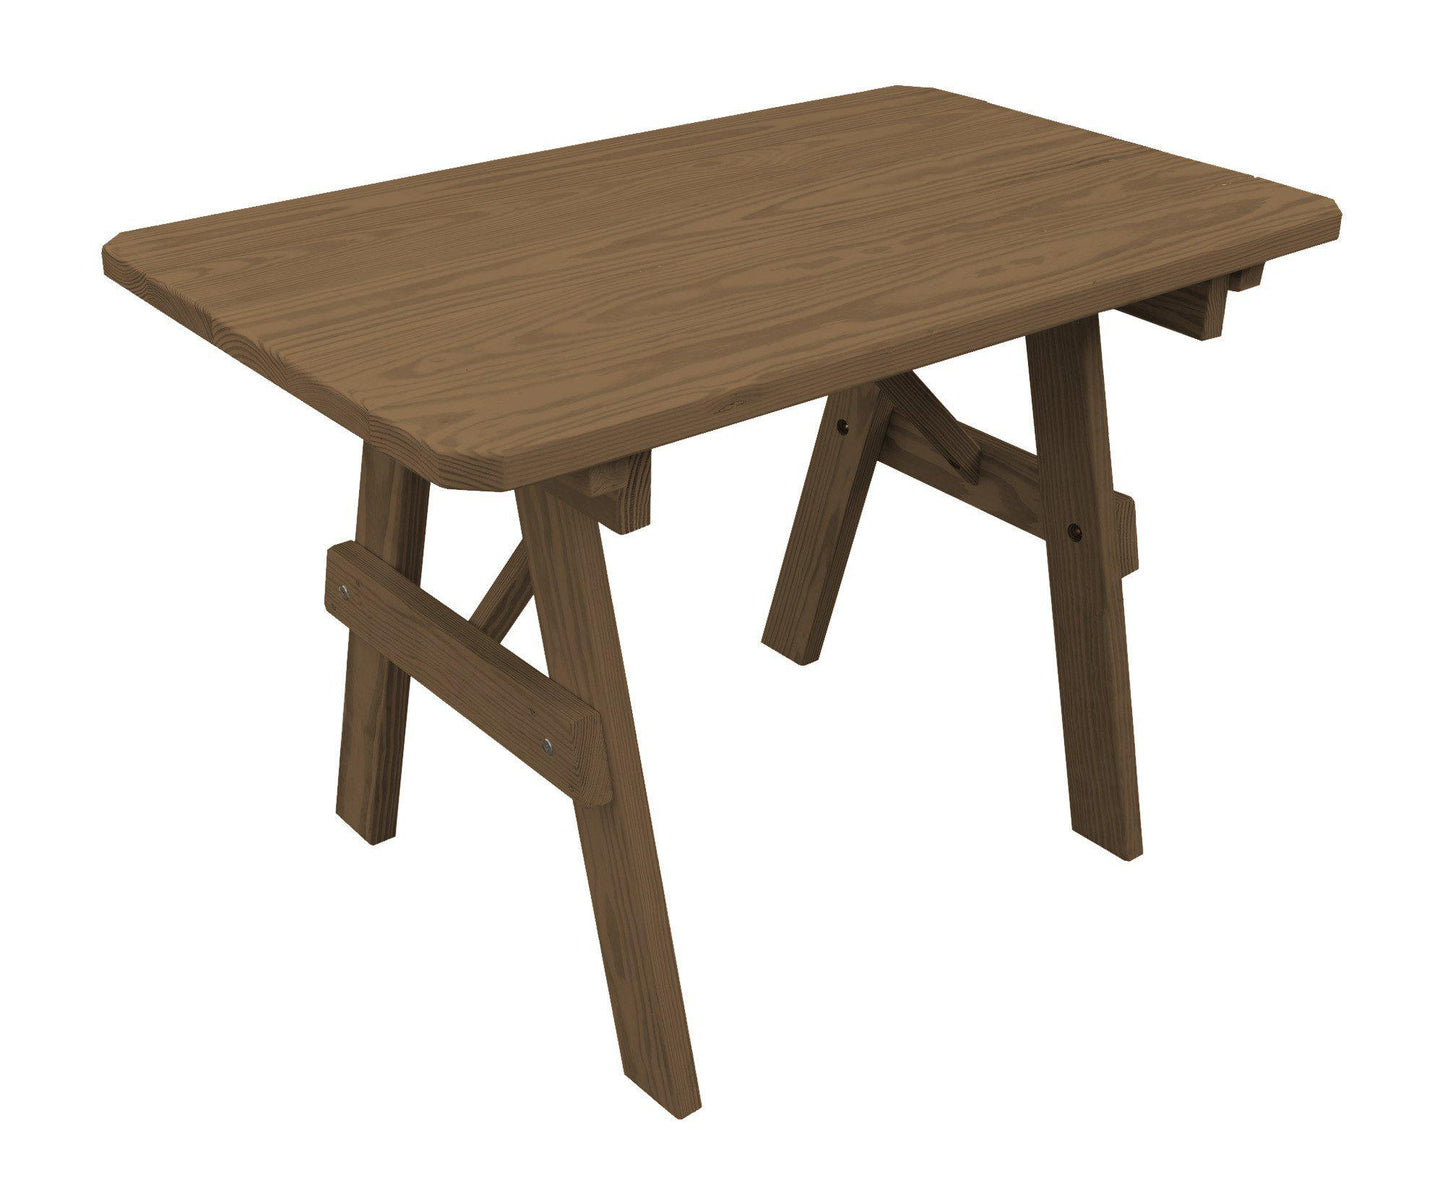 A&L Furniture Co. Pressure Treated Pine 5' Traditional Table Only - LEAD TIME TO SHIP 10 BUSINESS DAYS